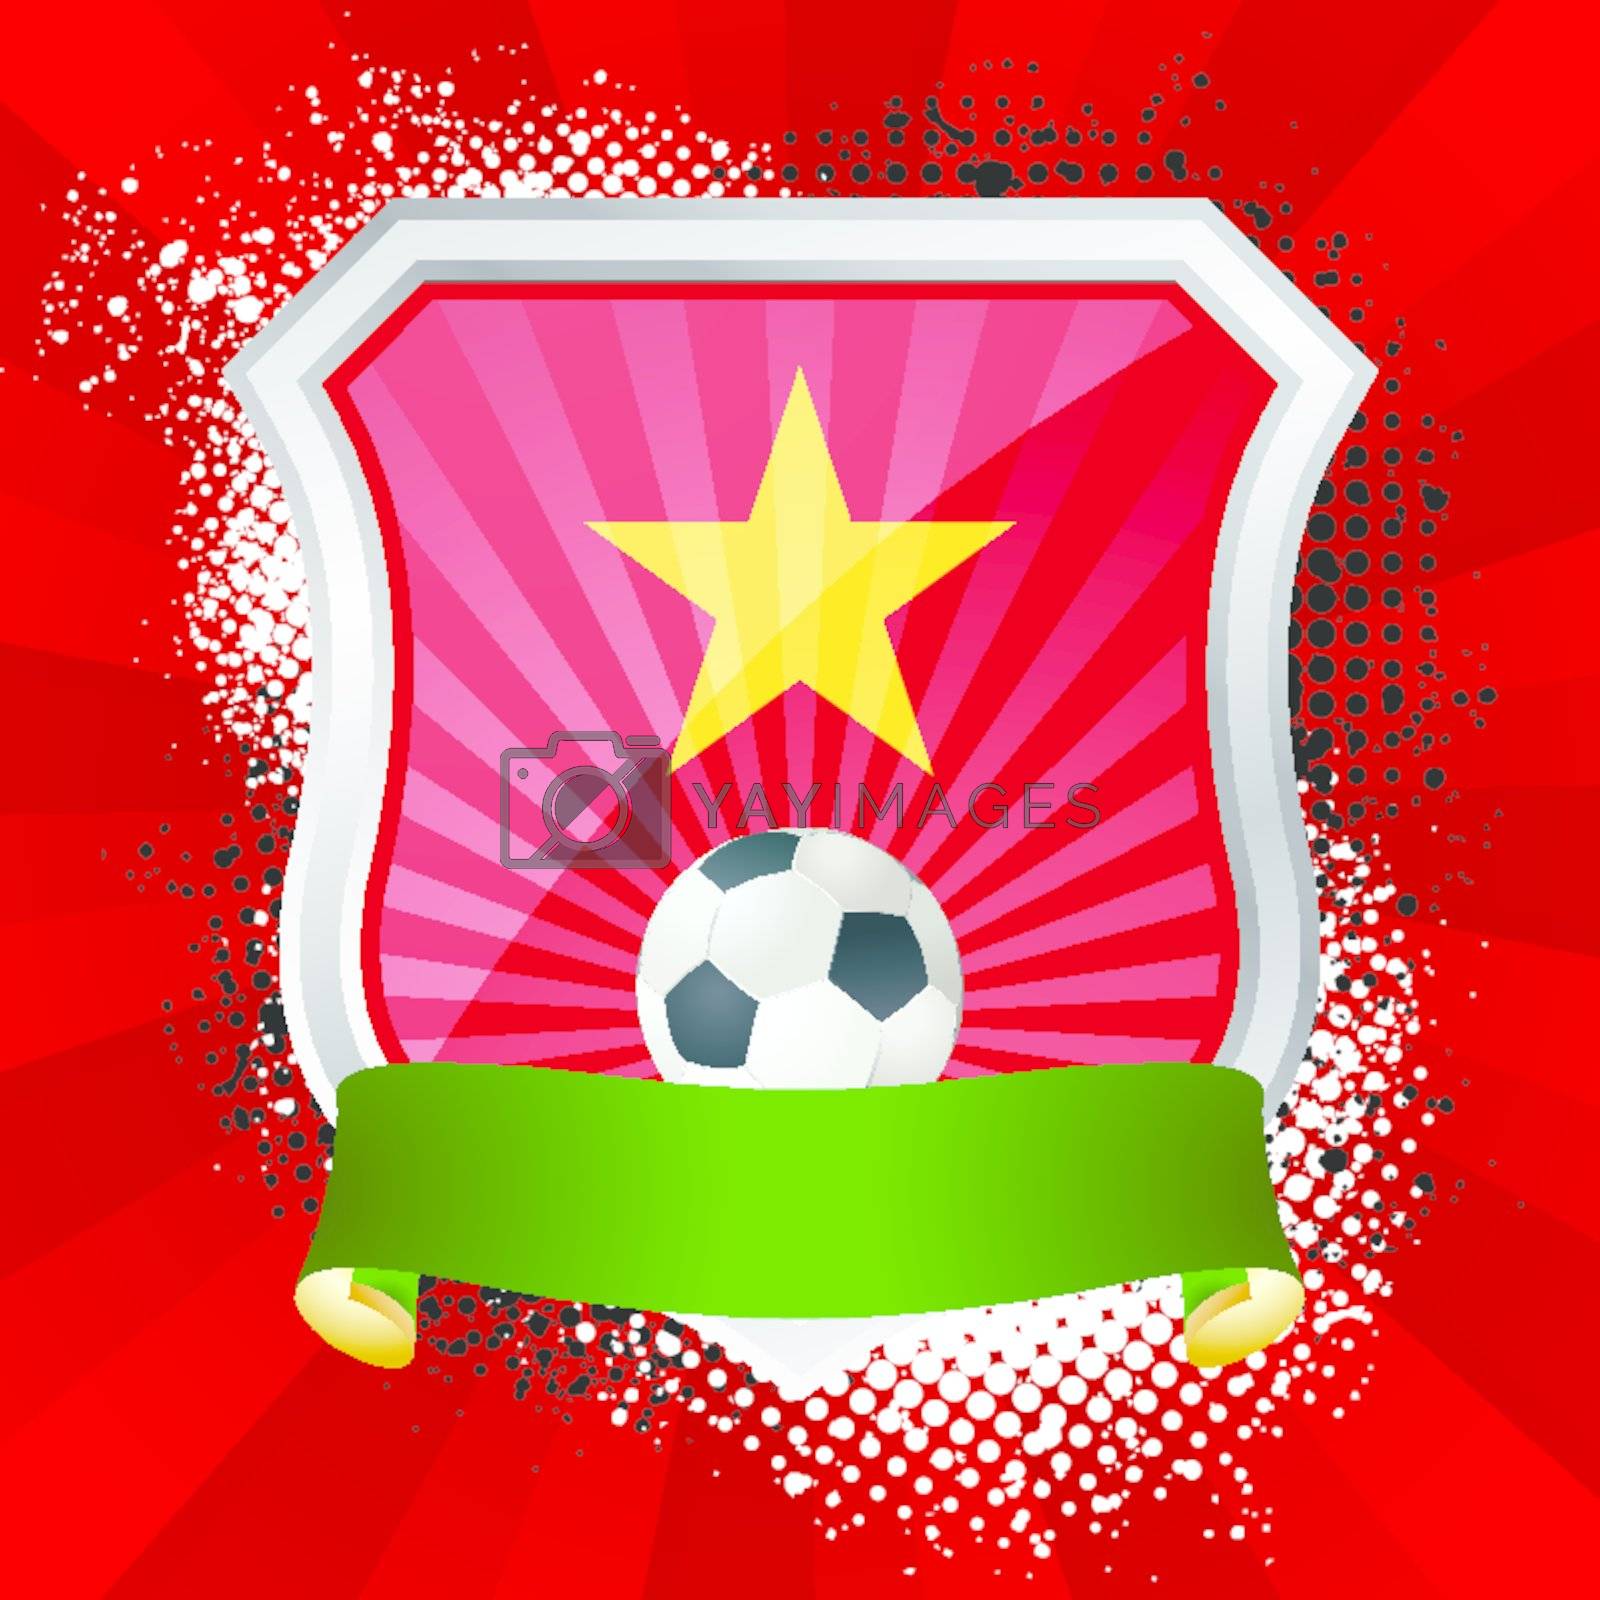 Royalty free image of Shield with flag of Vietnam by Petrov_Vladimir